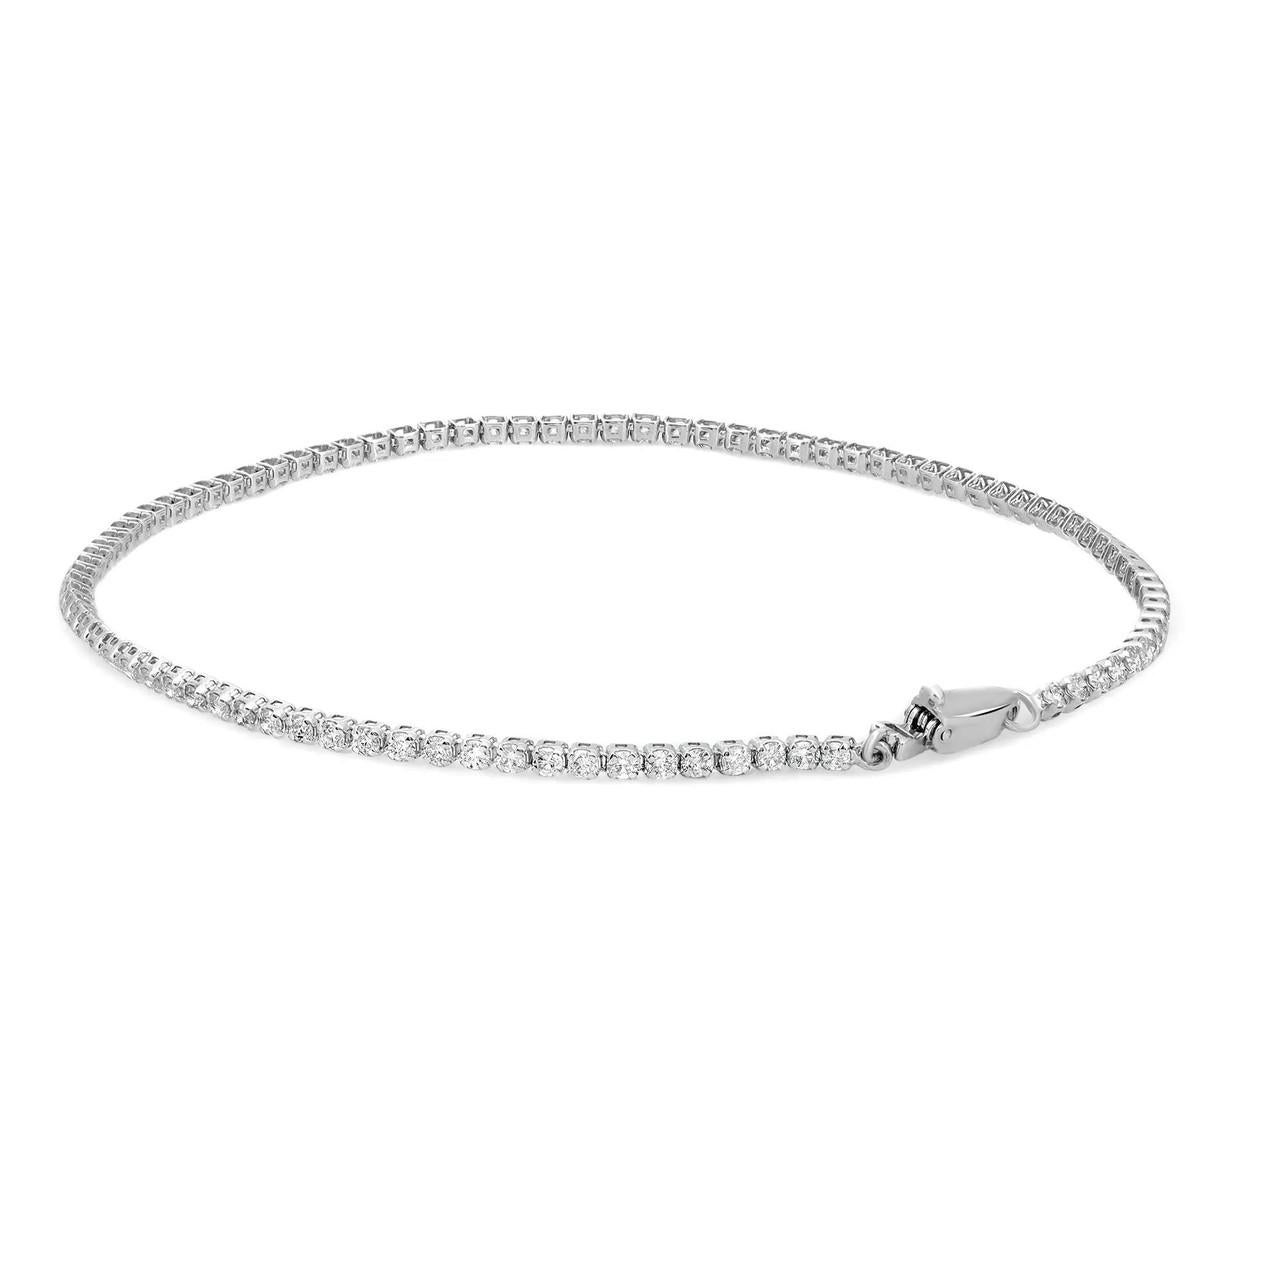 Elevate your elegance with this exquisite petite tennis bracelet, a stunning embodiment of sophistication. Crafted in 14k white gold, the bracelet showcases round brilliant cut diamonds in a prong setting style, radiating a timeless allure. Its